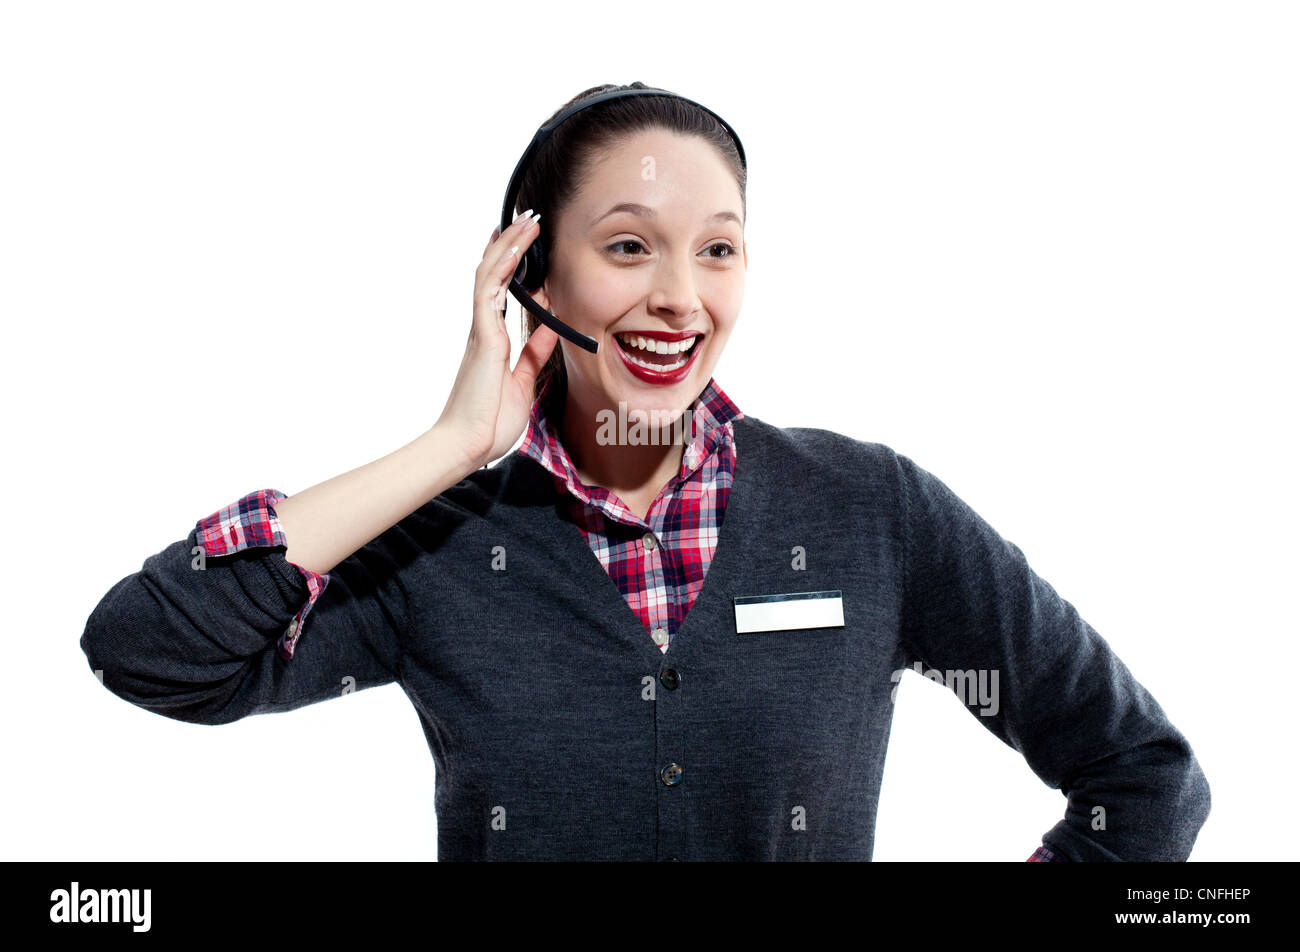 Happy young woman on telephone headset Stock Photo